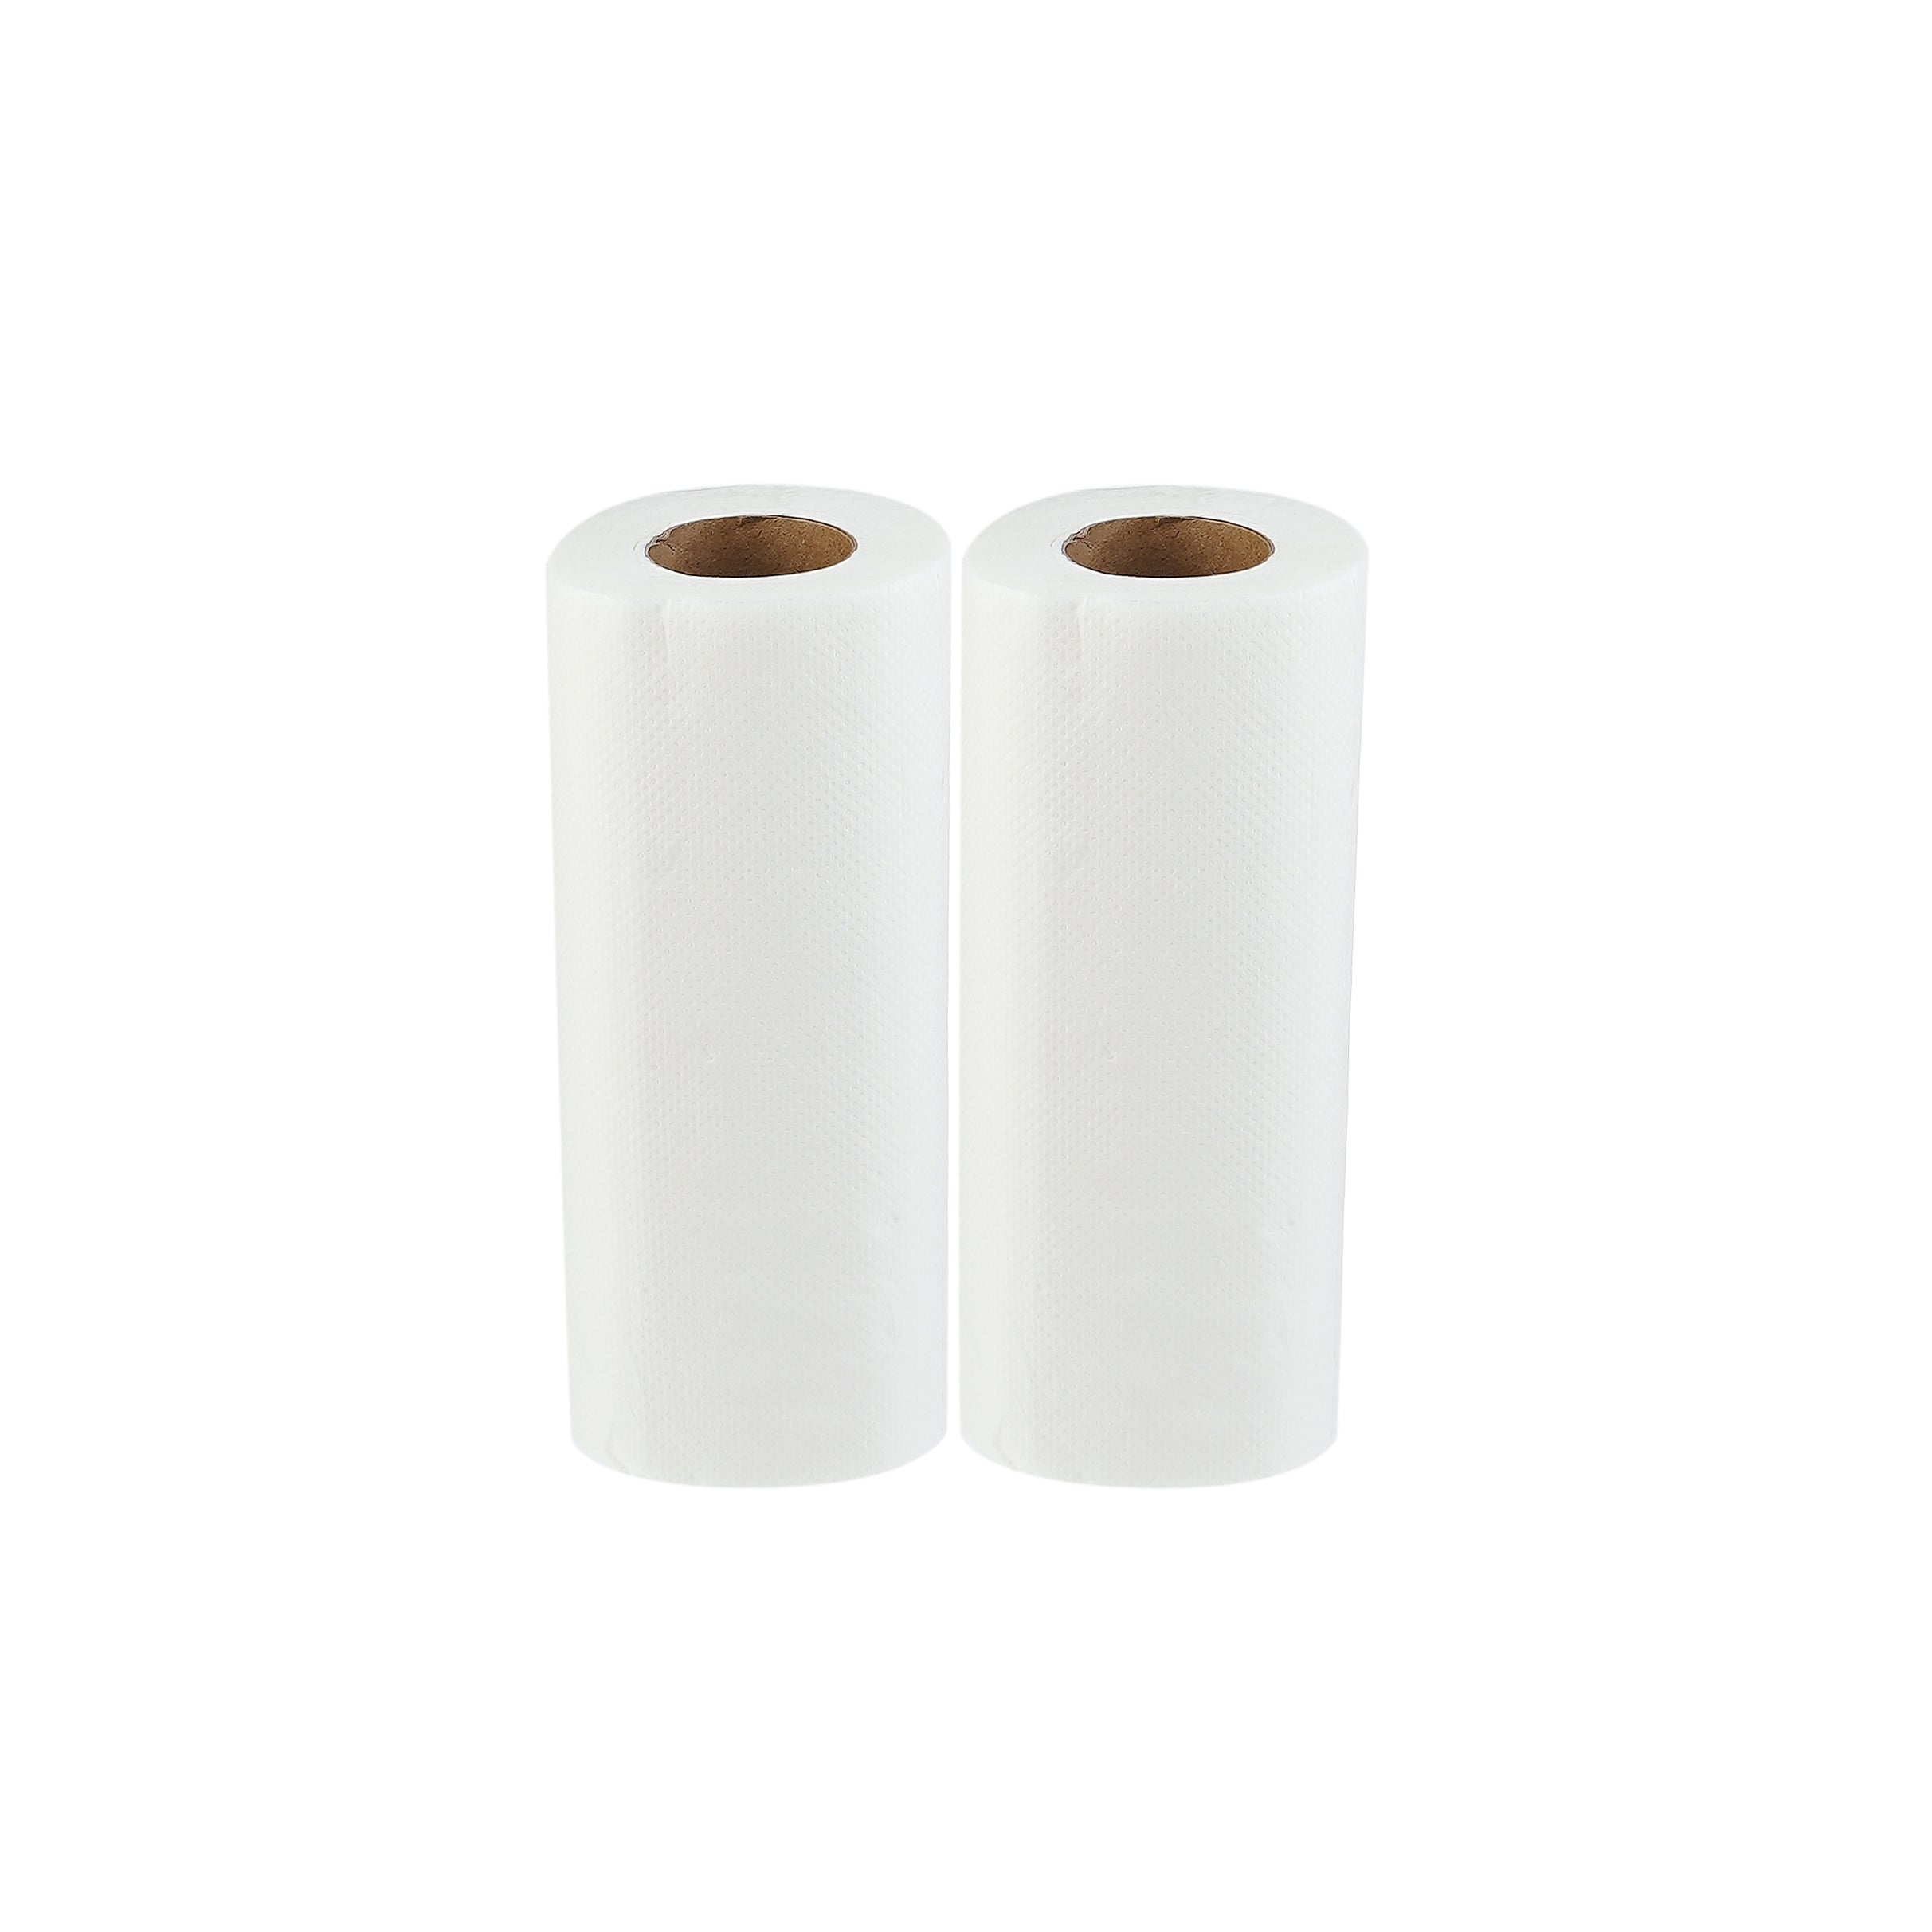 Soft n Cool Twin Pack Embossed Maxi Roll 2Ply + Soft n Cool Paper Kitchen Roll 2 Ply 2 Rolls 28th Anniversary Combo - hotpackwebstore.com